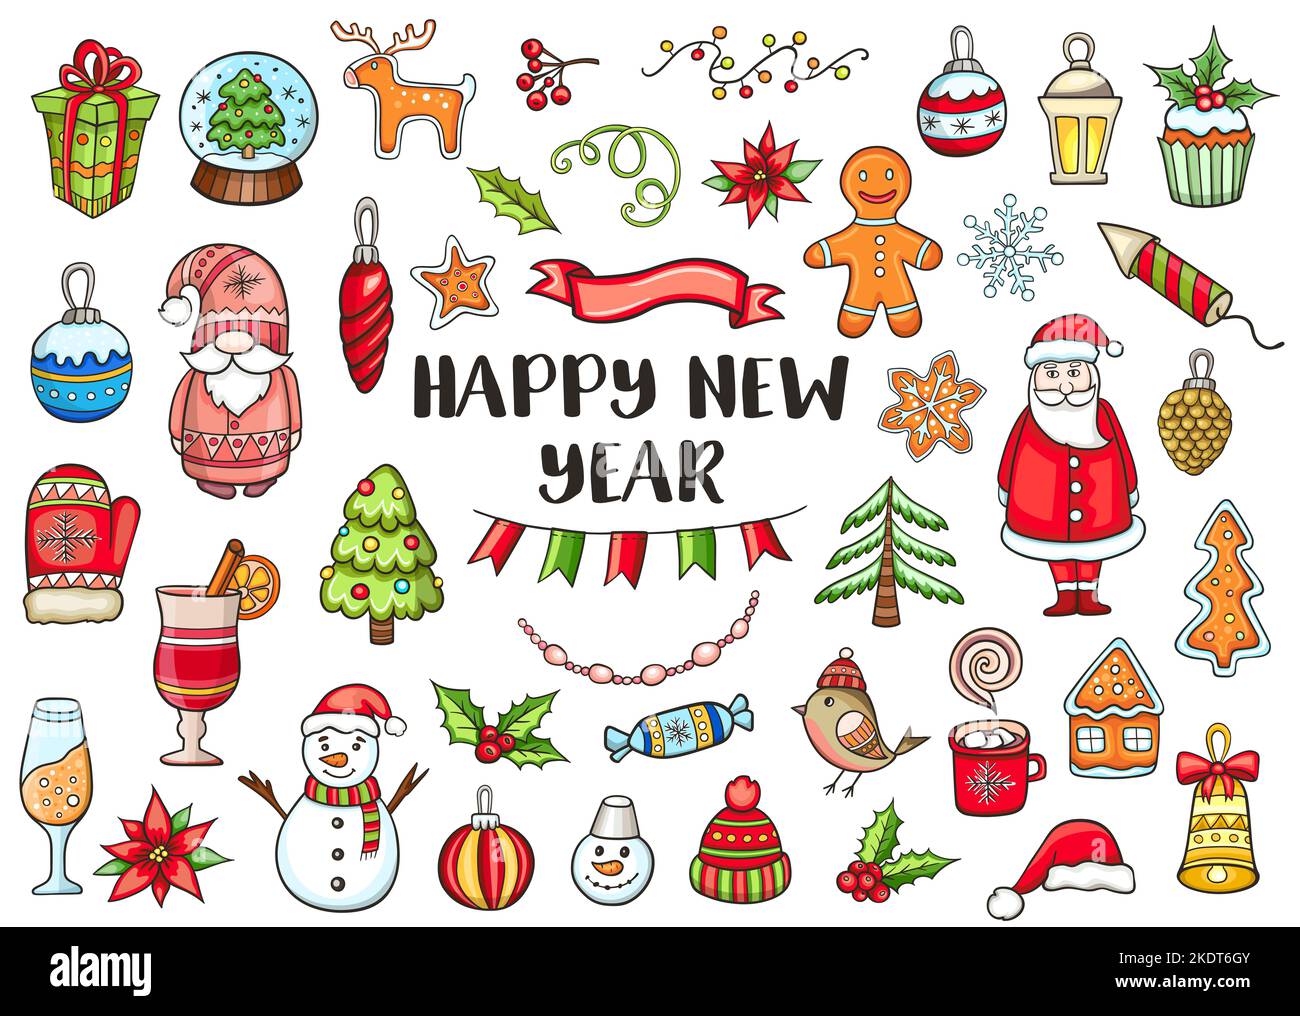 Set of hand drawn Christmas and New Year doodle design elements on a white background. Stock Photo